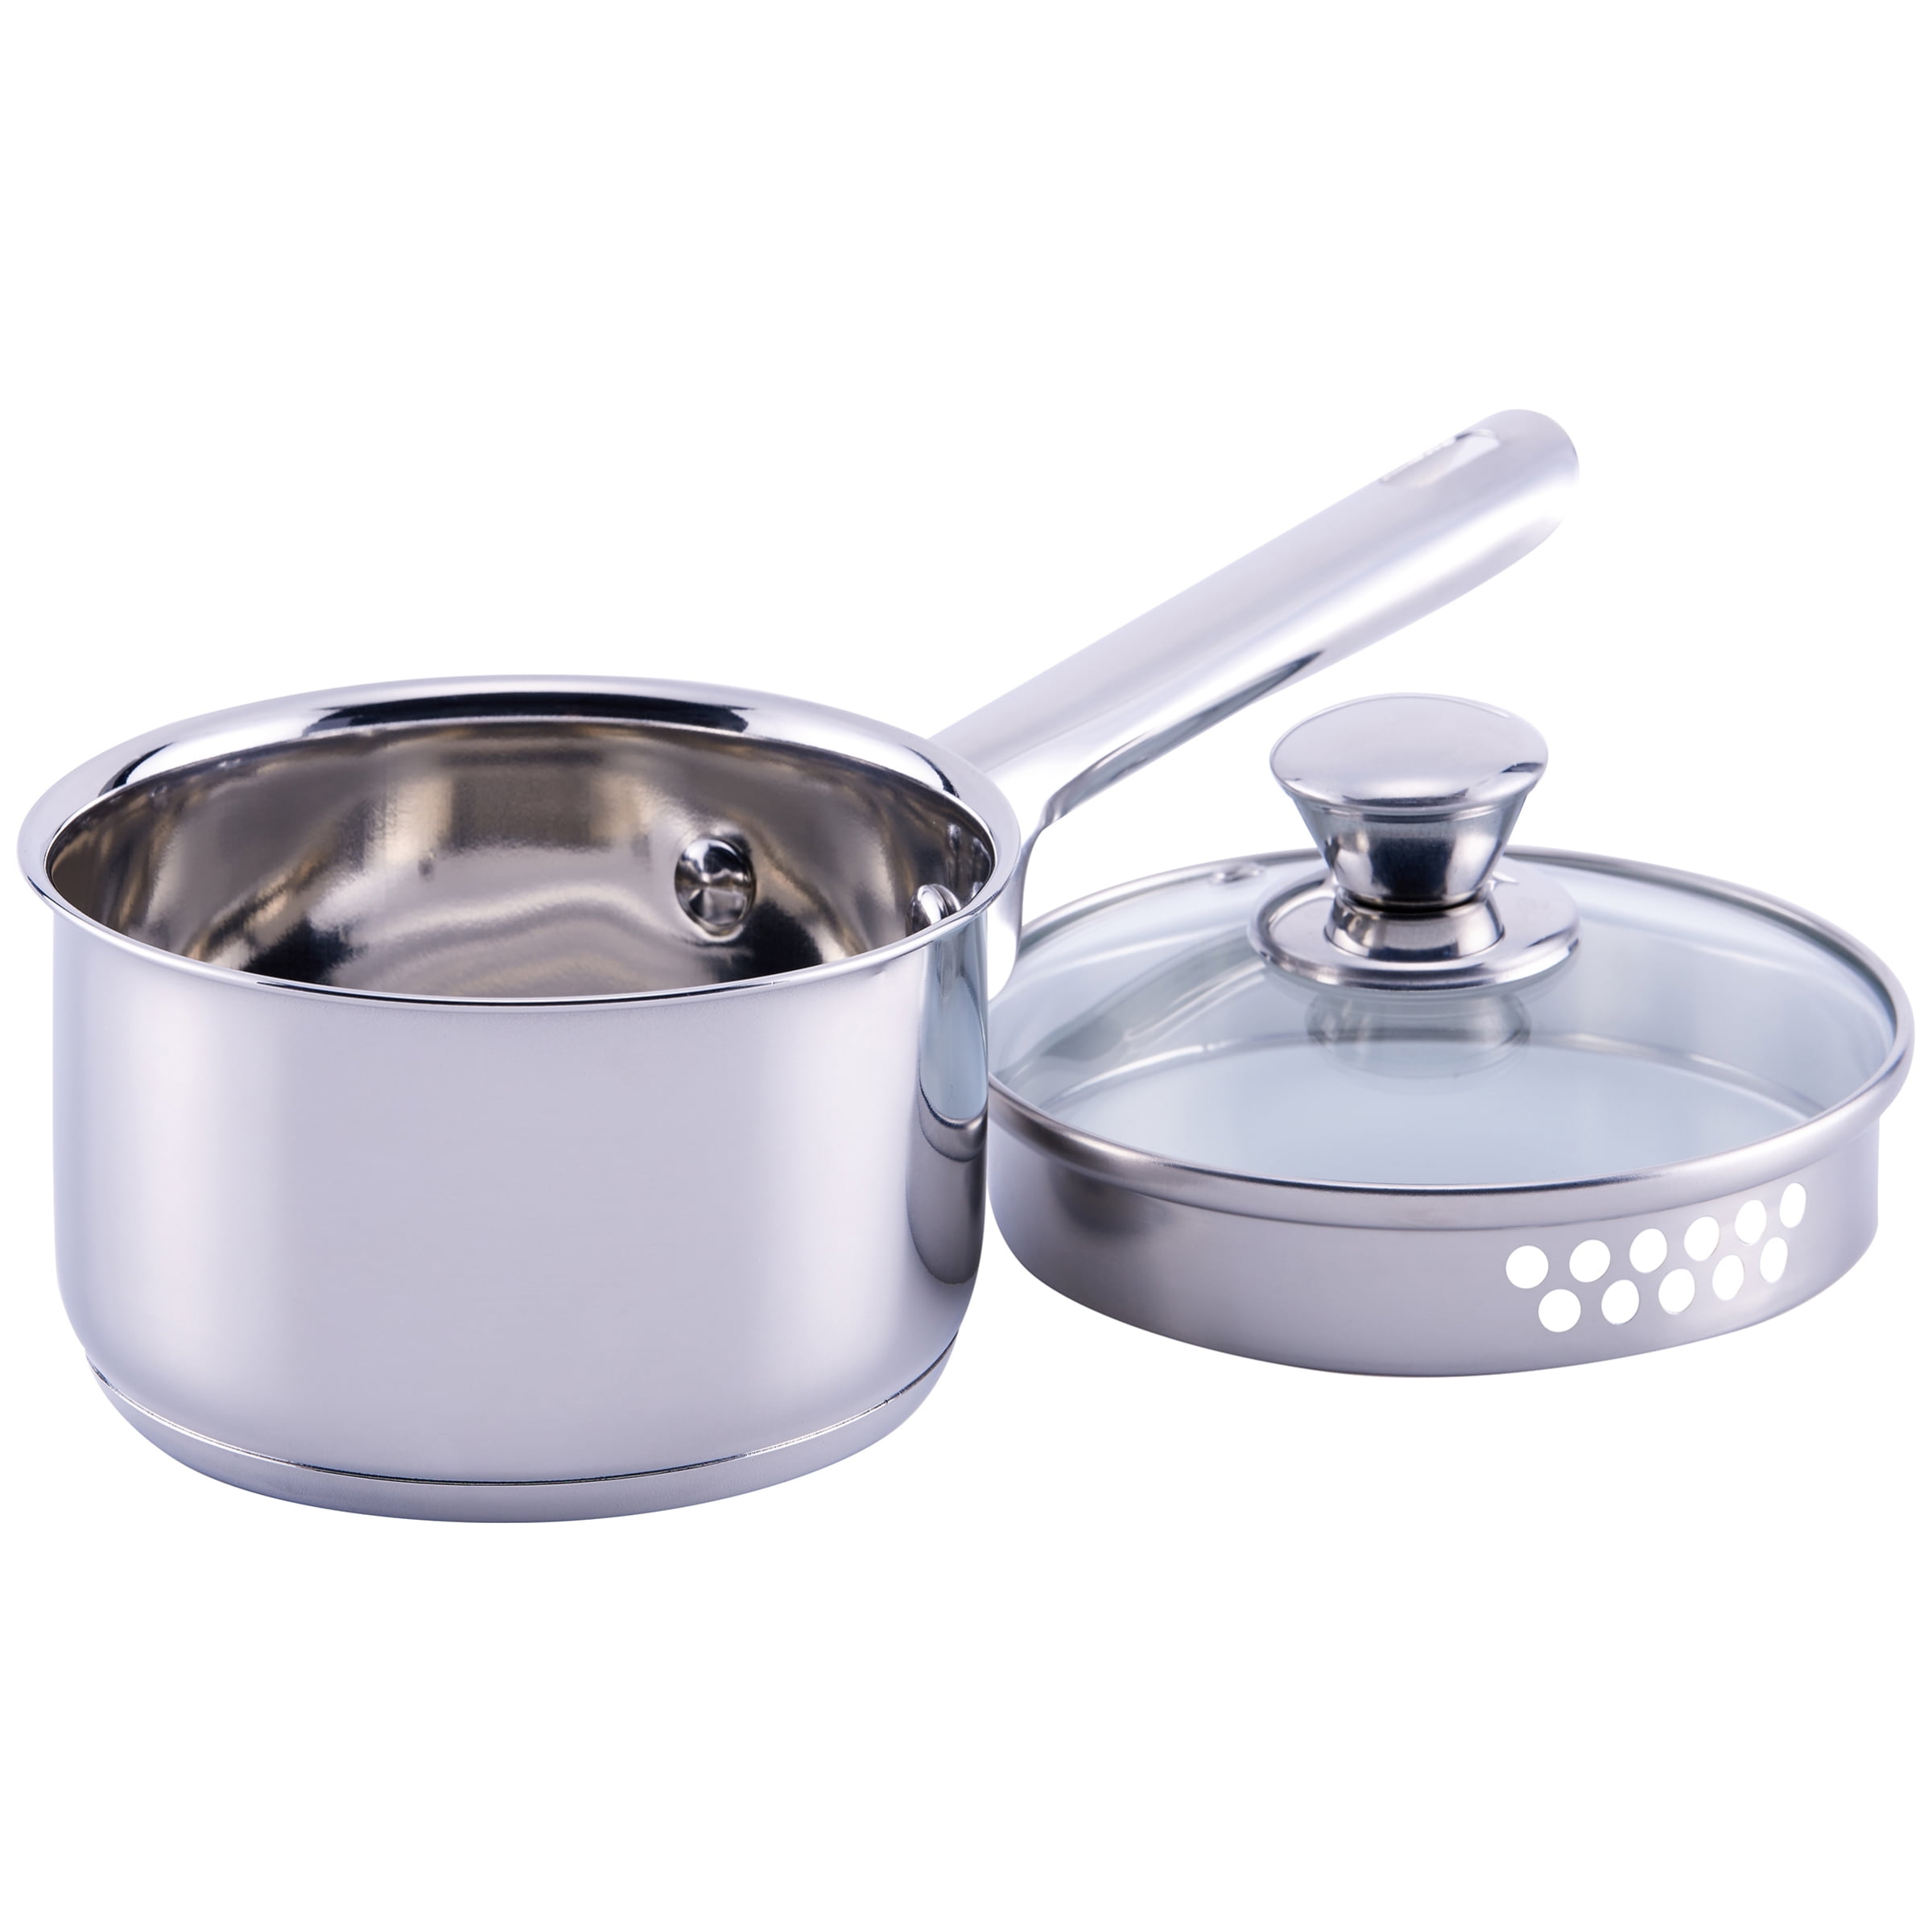 Dishwasher Safe Mainstays Stainless Steel 1qt Sauce Pan with Lid Aluminum Base 